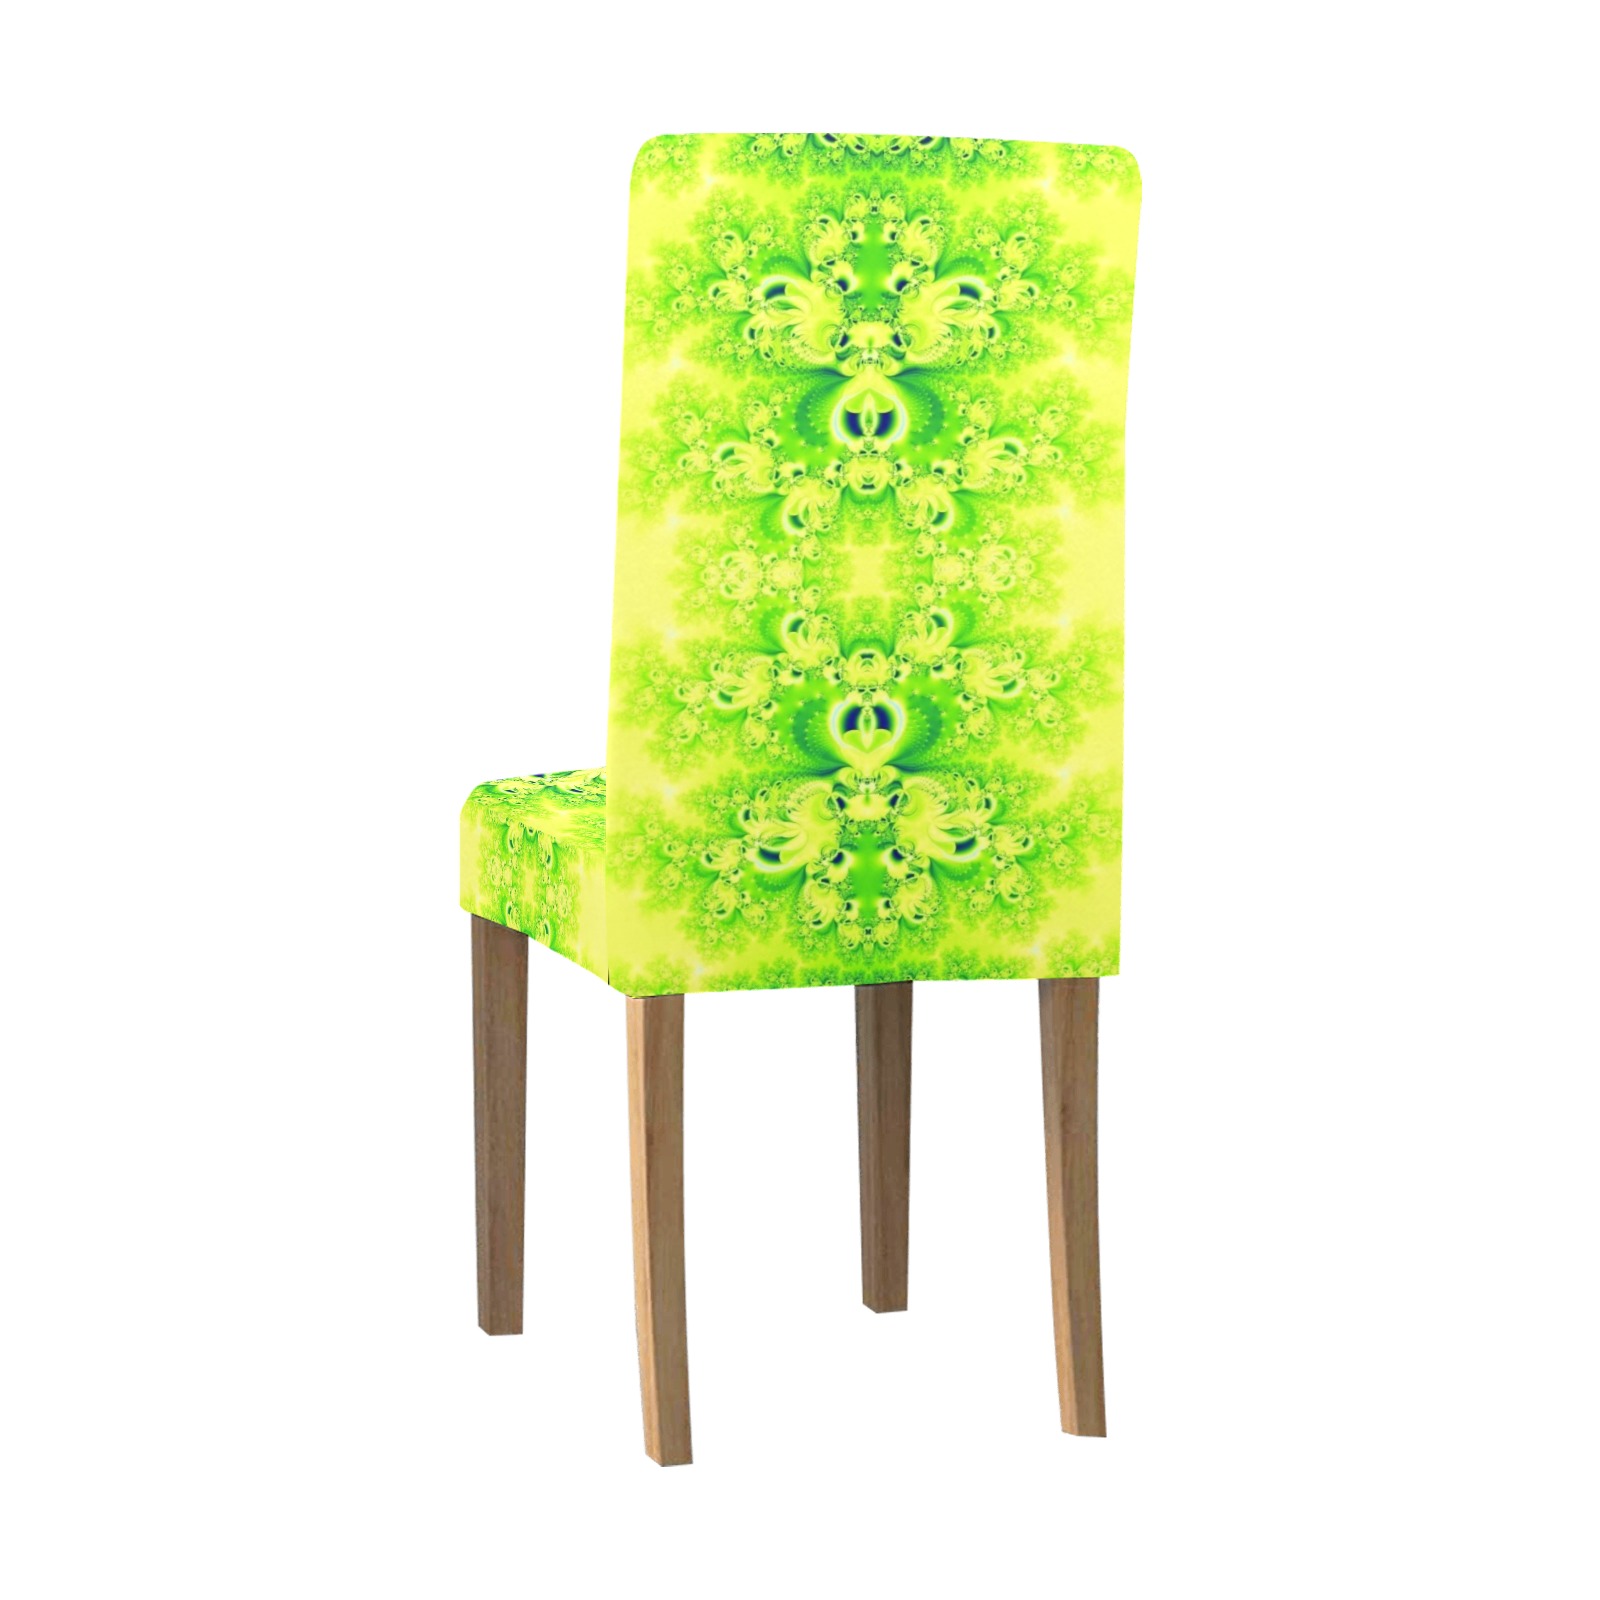 Sunny Ukrainian Sunflowers Frost Fractal Chair Cover (Pack of 4)